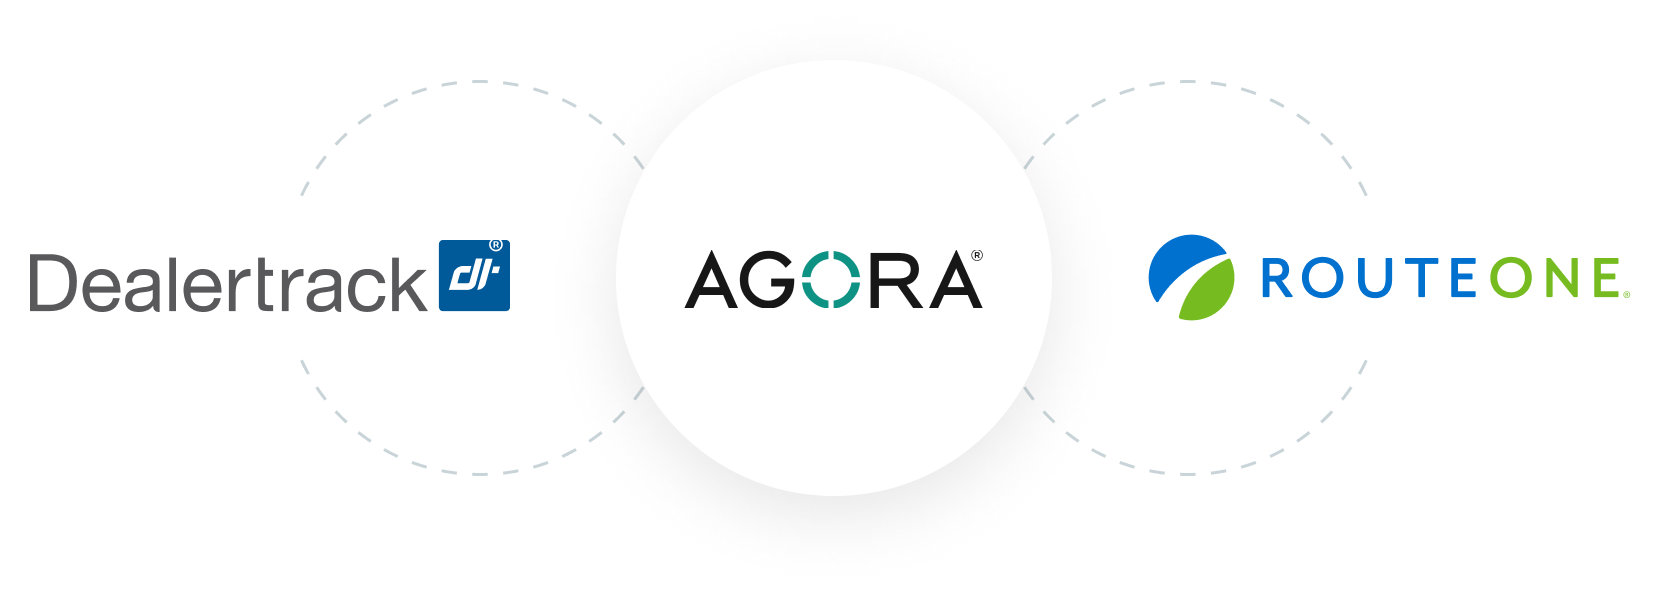 Dealertrack, Agora Data, and RouteOne logos